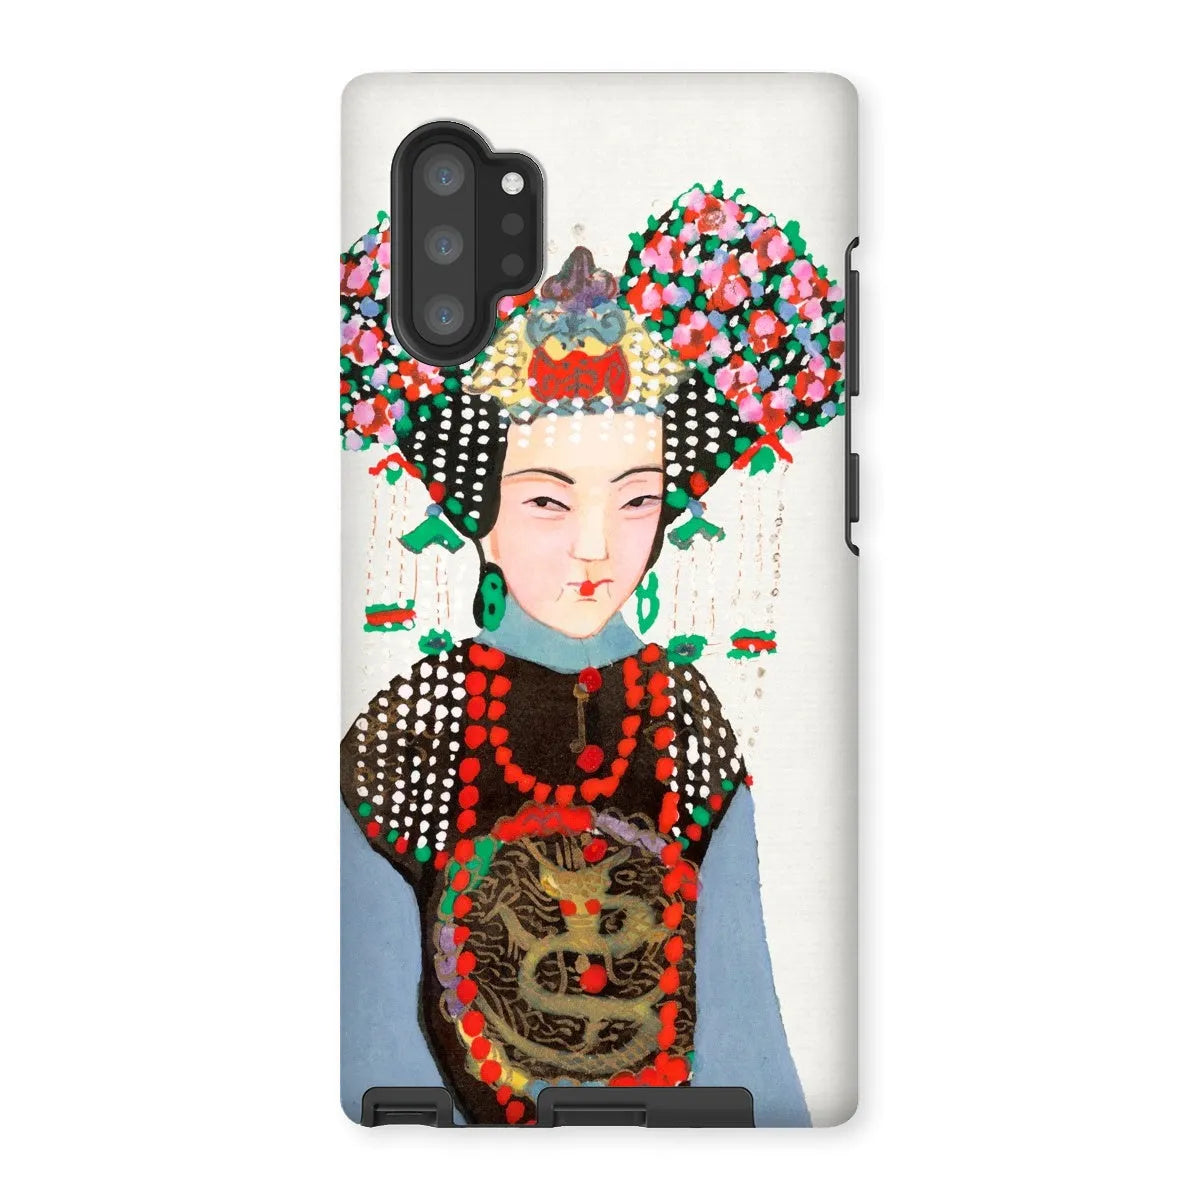 Chinese Empress - Manchu Art Phone Case - Samsung Galaxy Note 10p / Matte - Mobile Phone Cases - Aesthetic Art